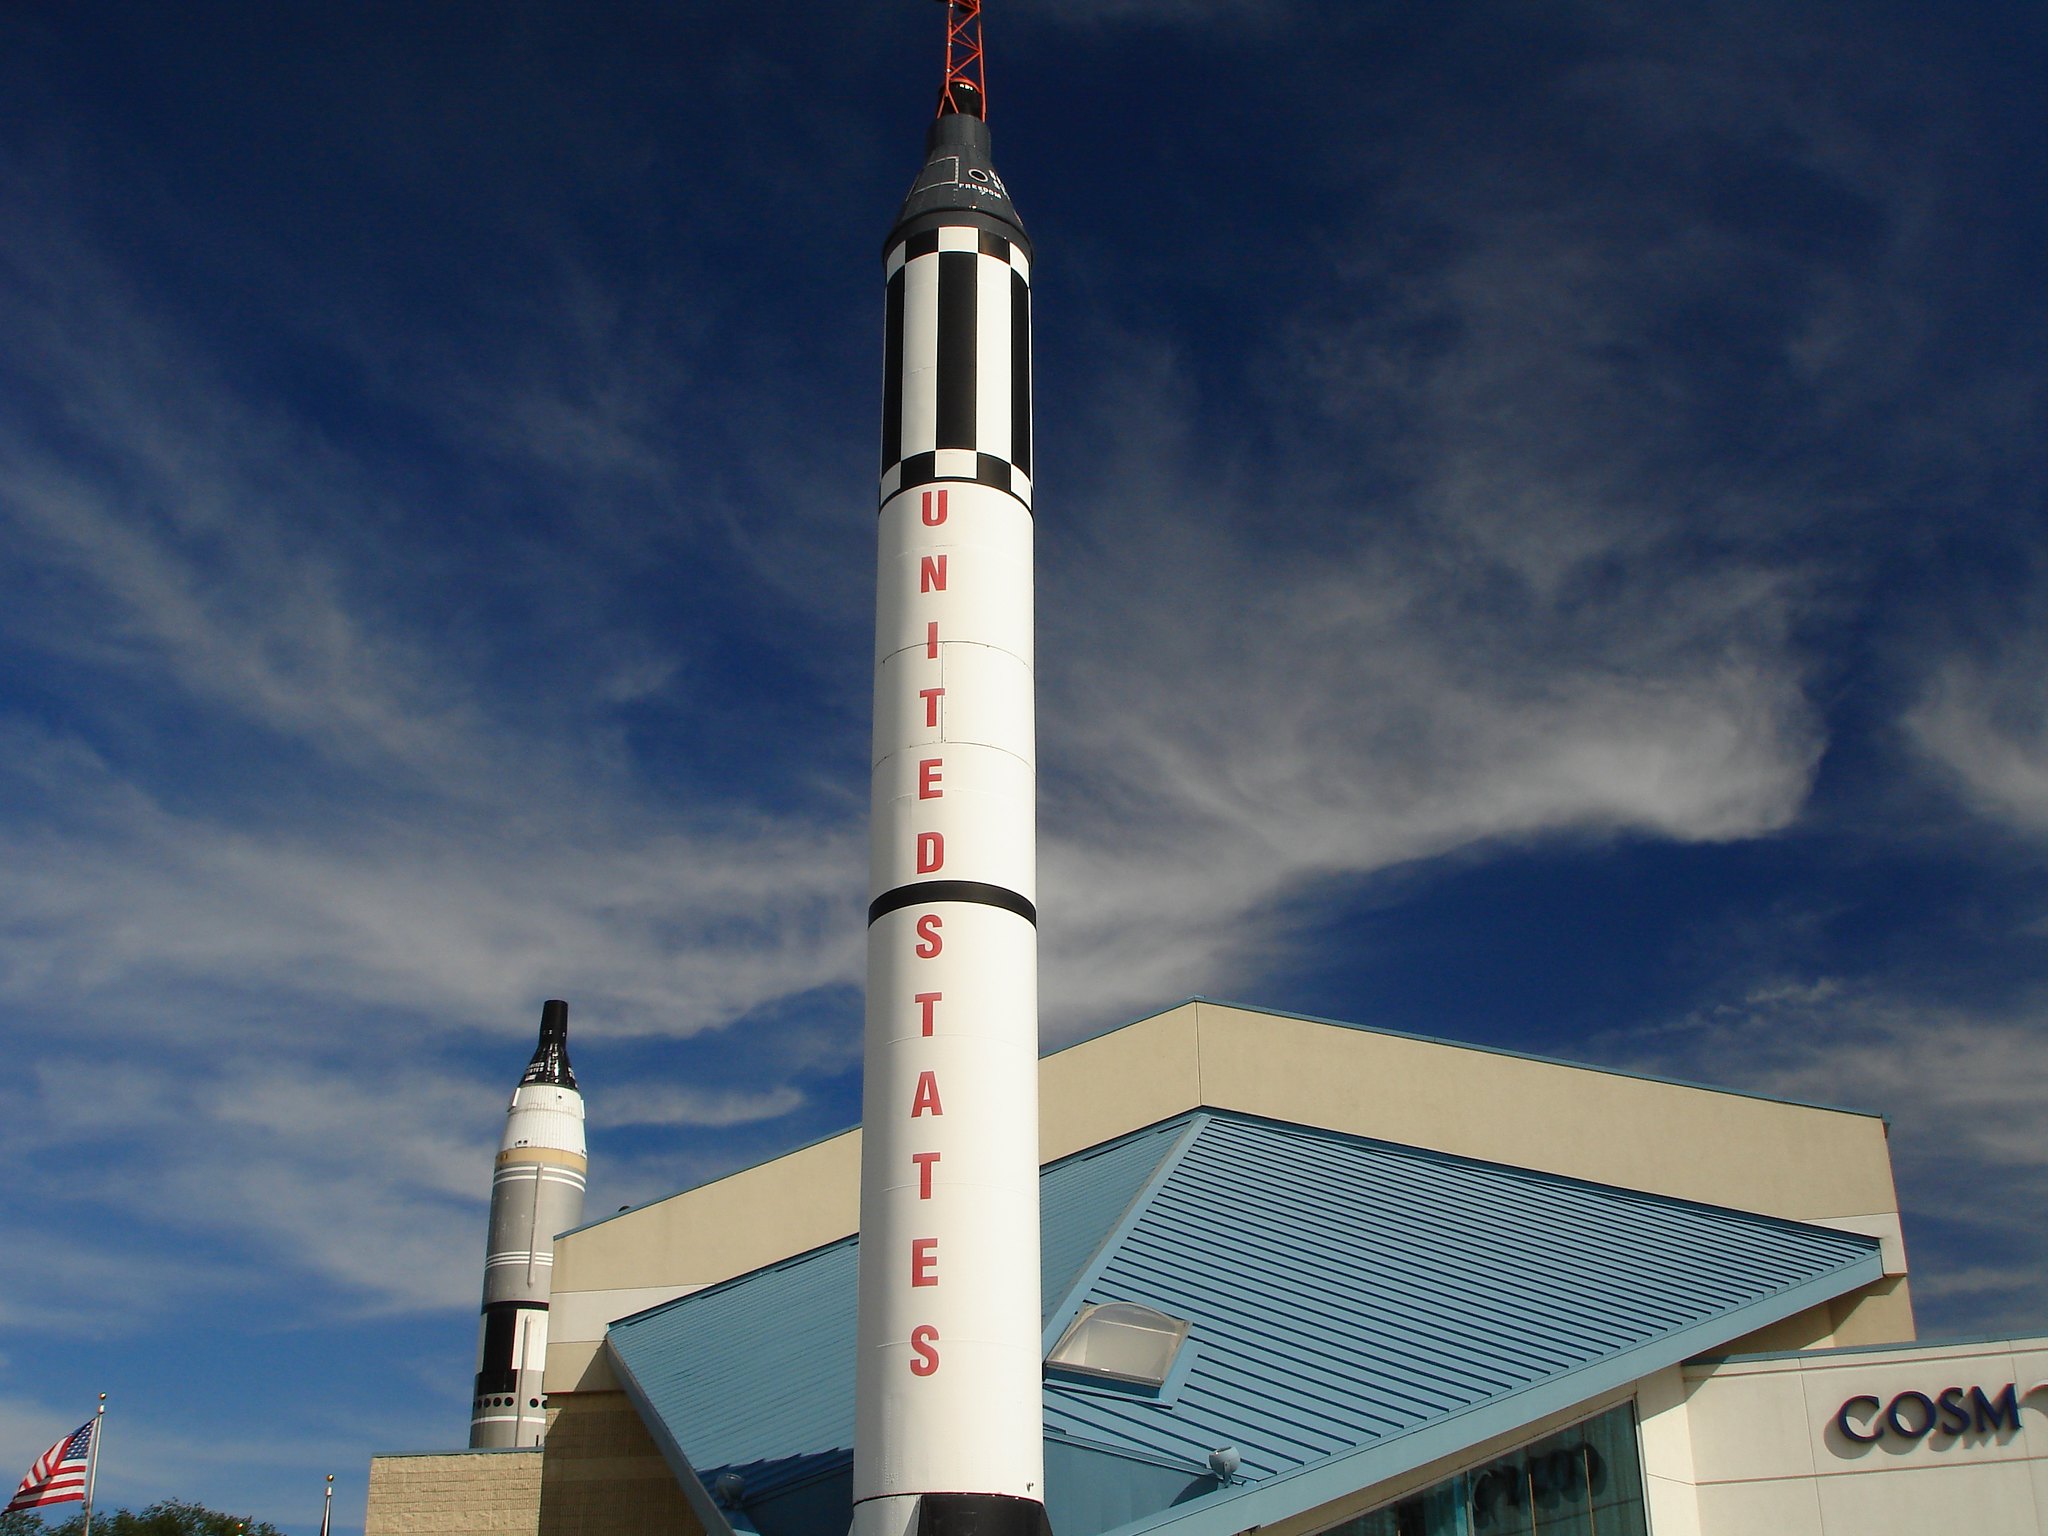 A dreamy sky over the tall Mercury Rocket at Cosmosphere, one of the best things to see in Kansas